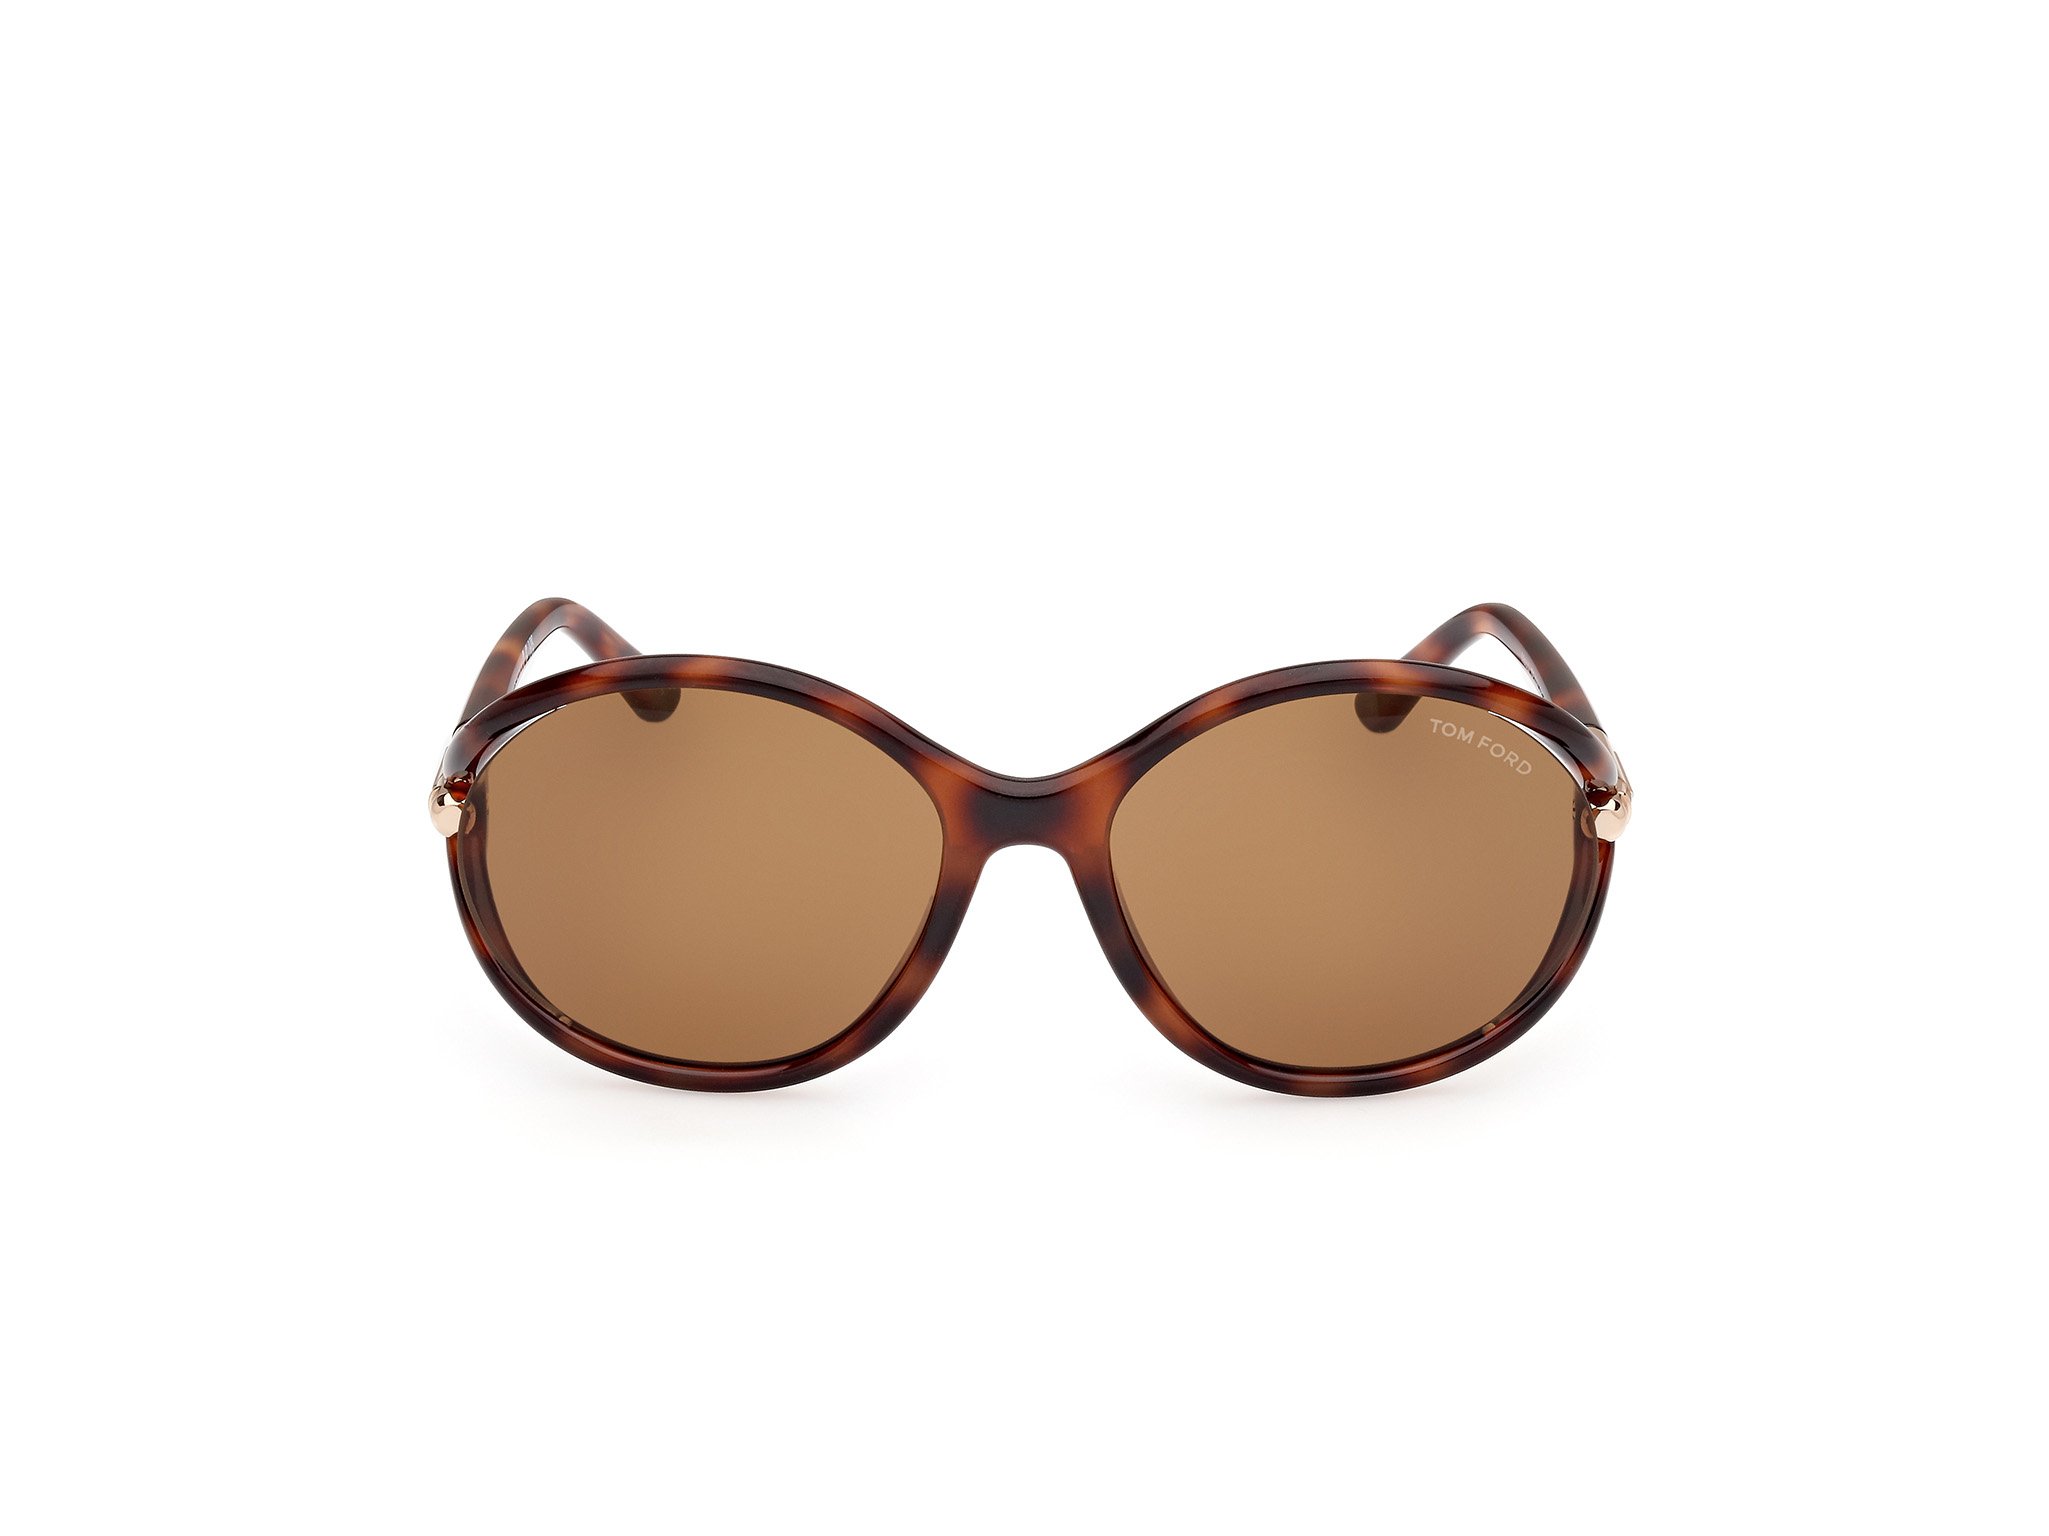  Tom Ford Sonnenbrille Melody in havanna FT1090 53E